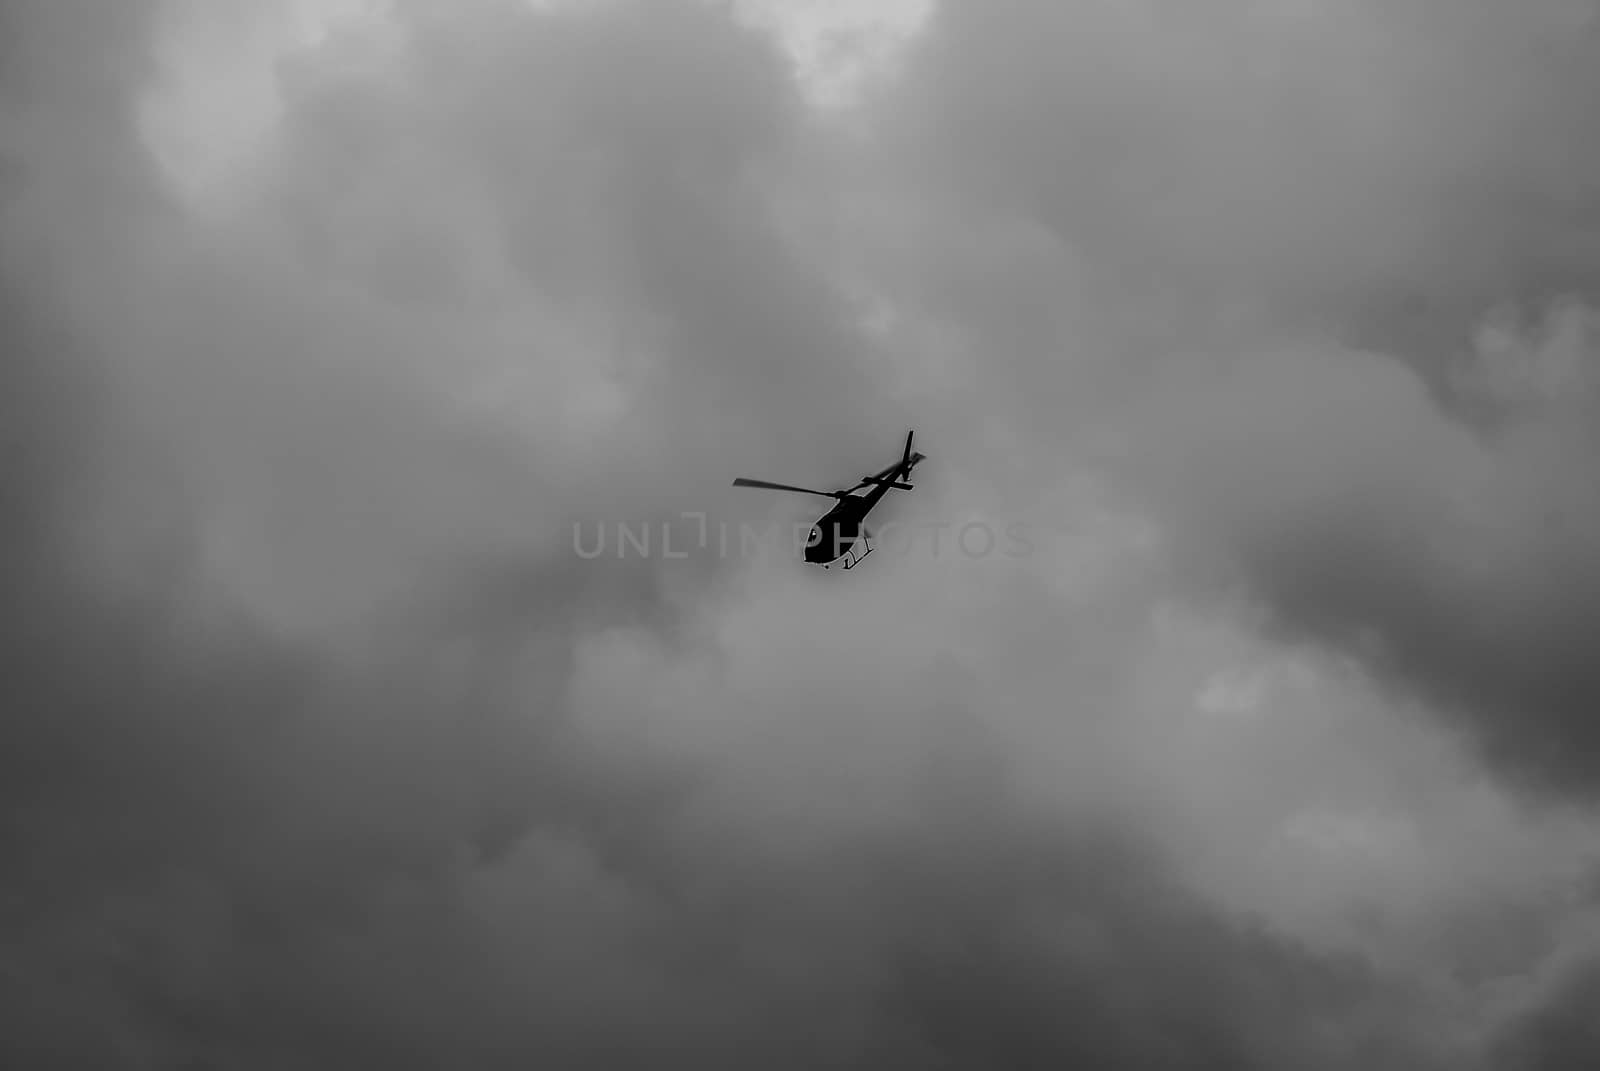 A single helicopter in the sky by arvidnorberg